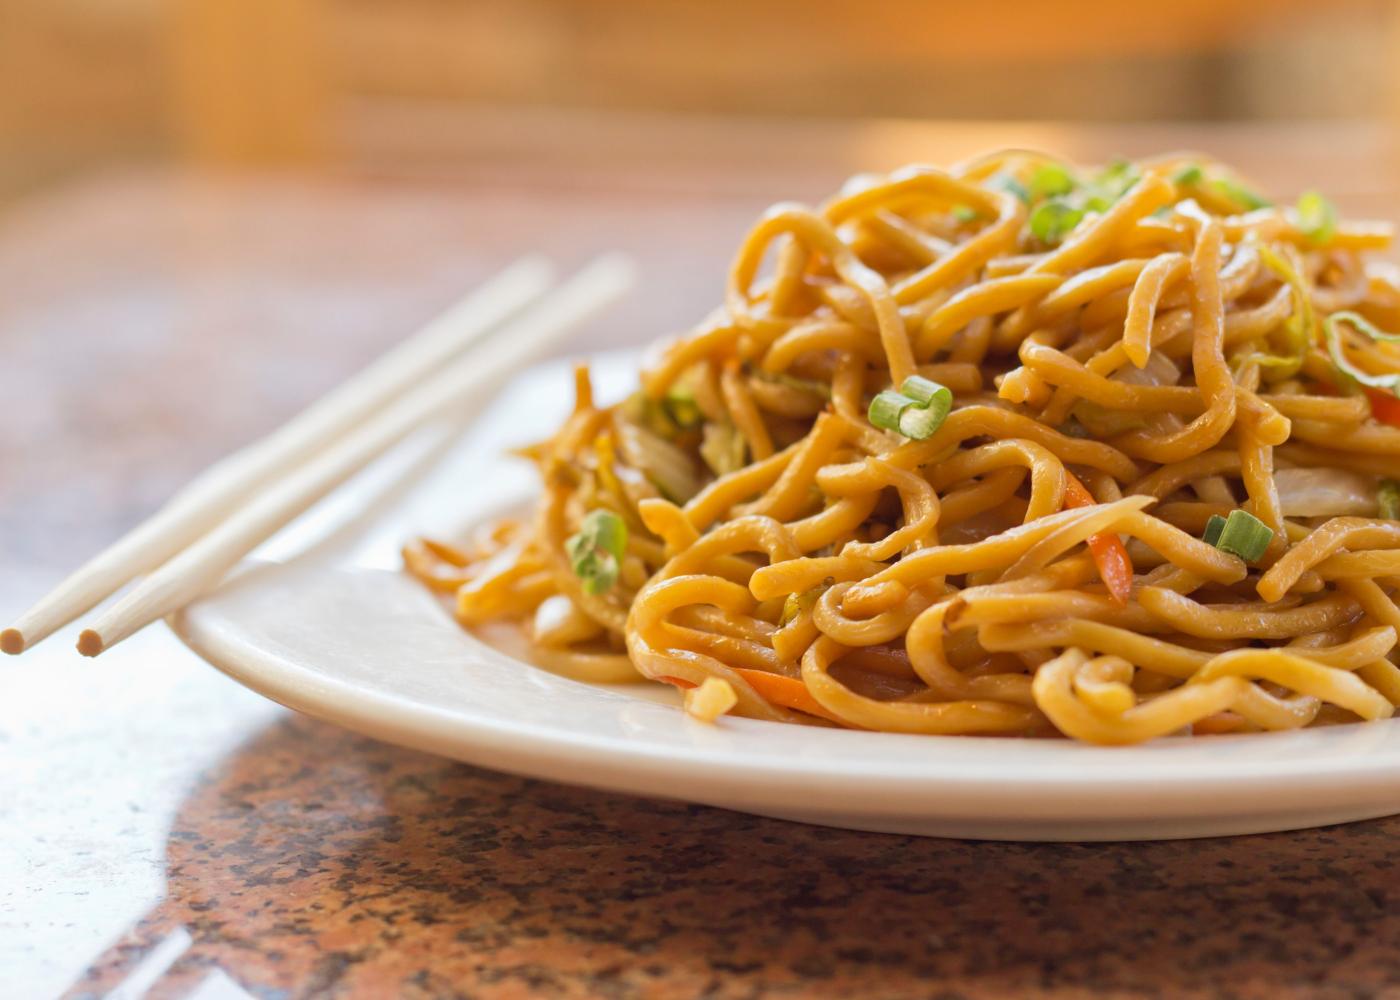 Fried noodles on a plate with chopsticks